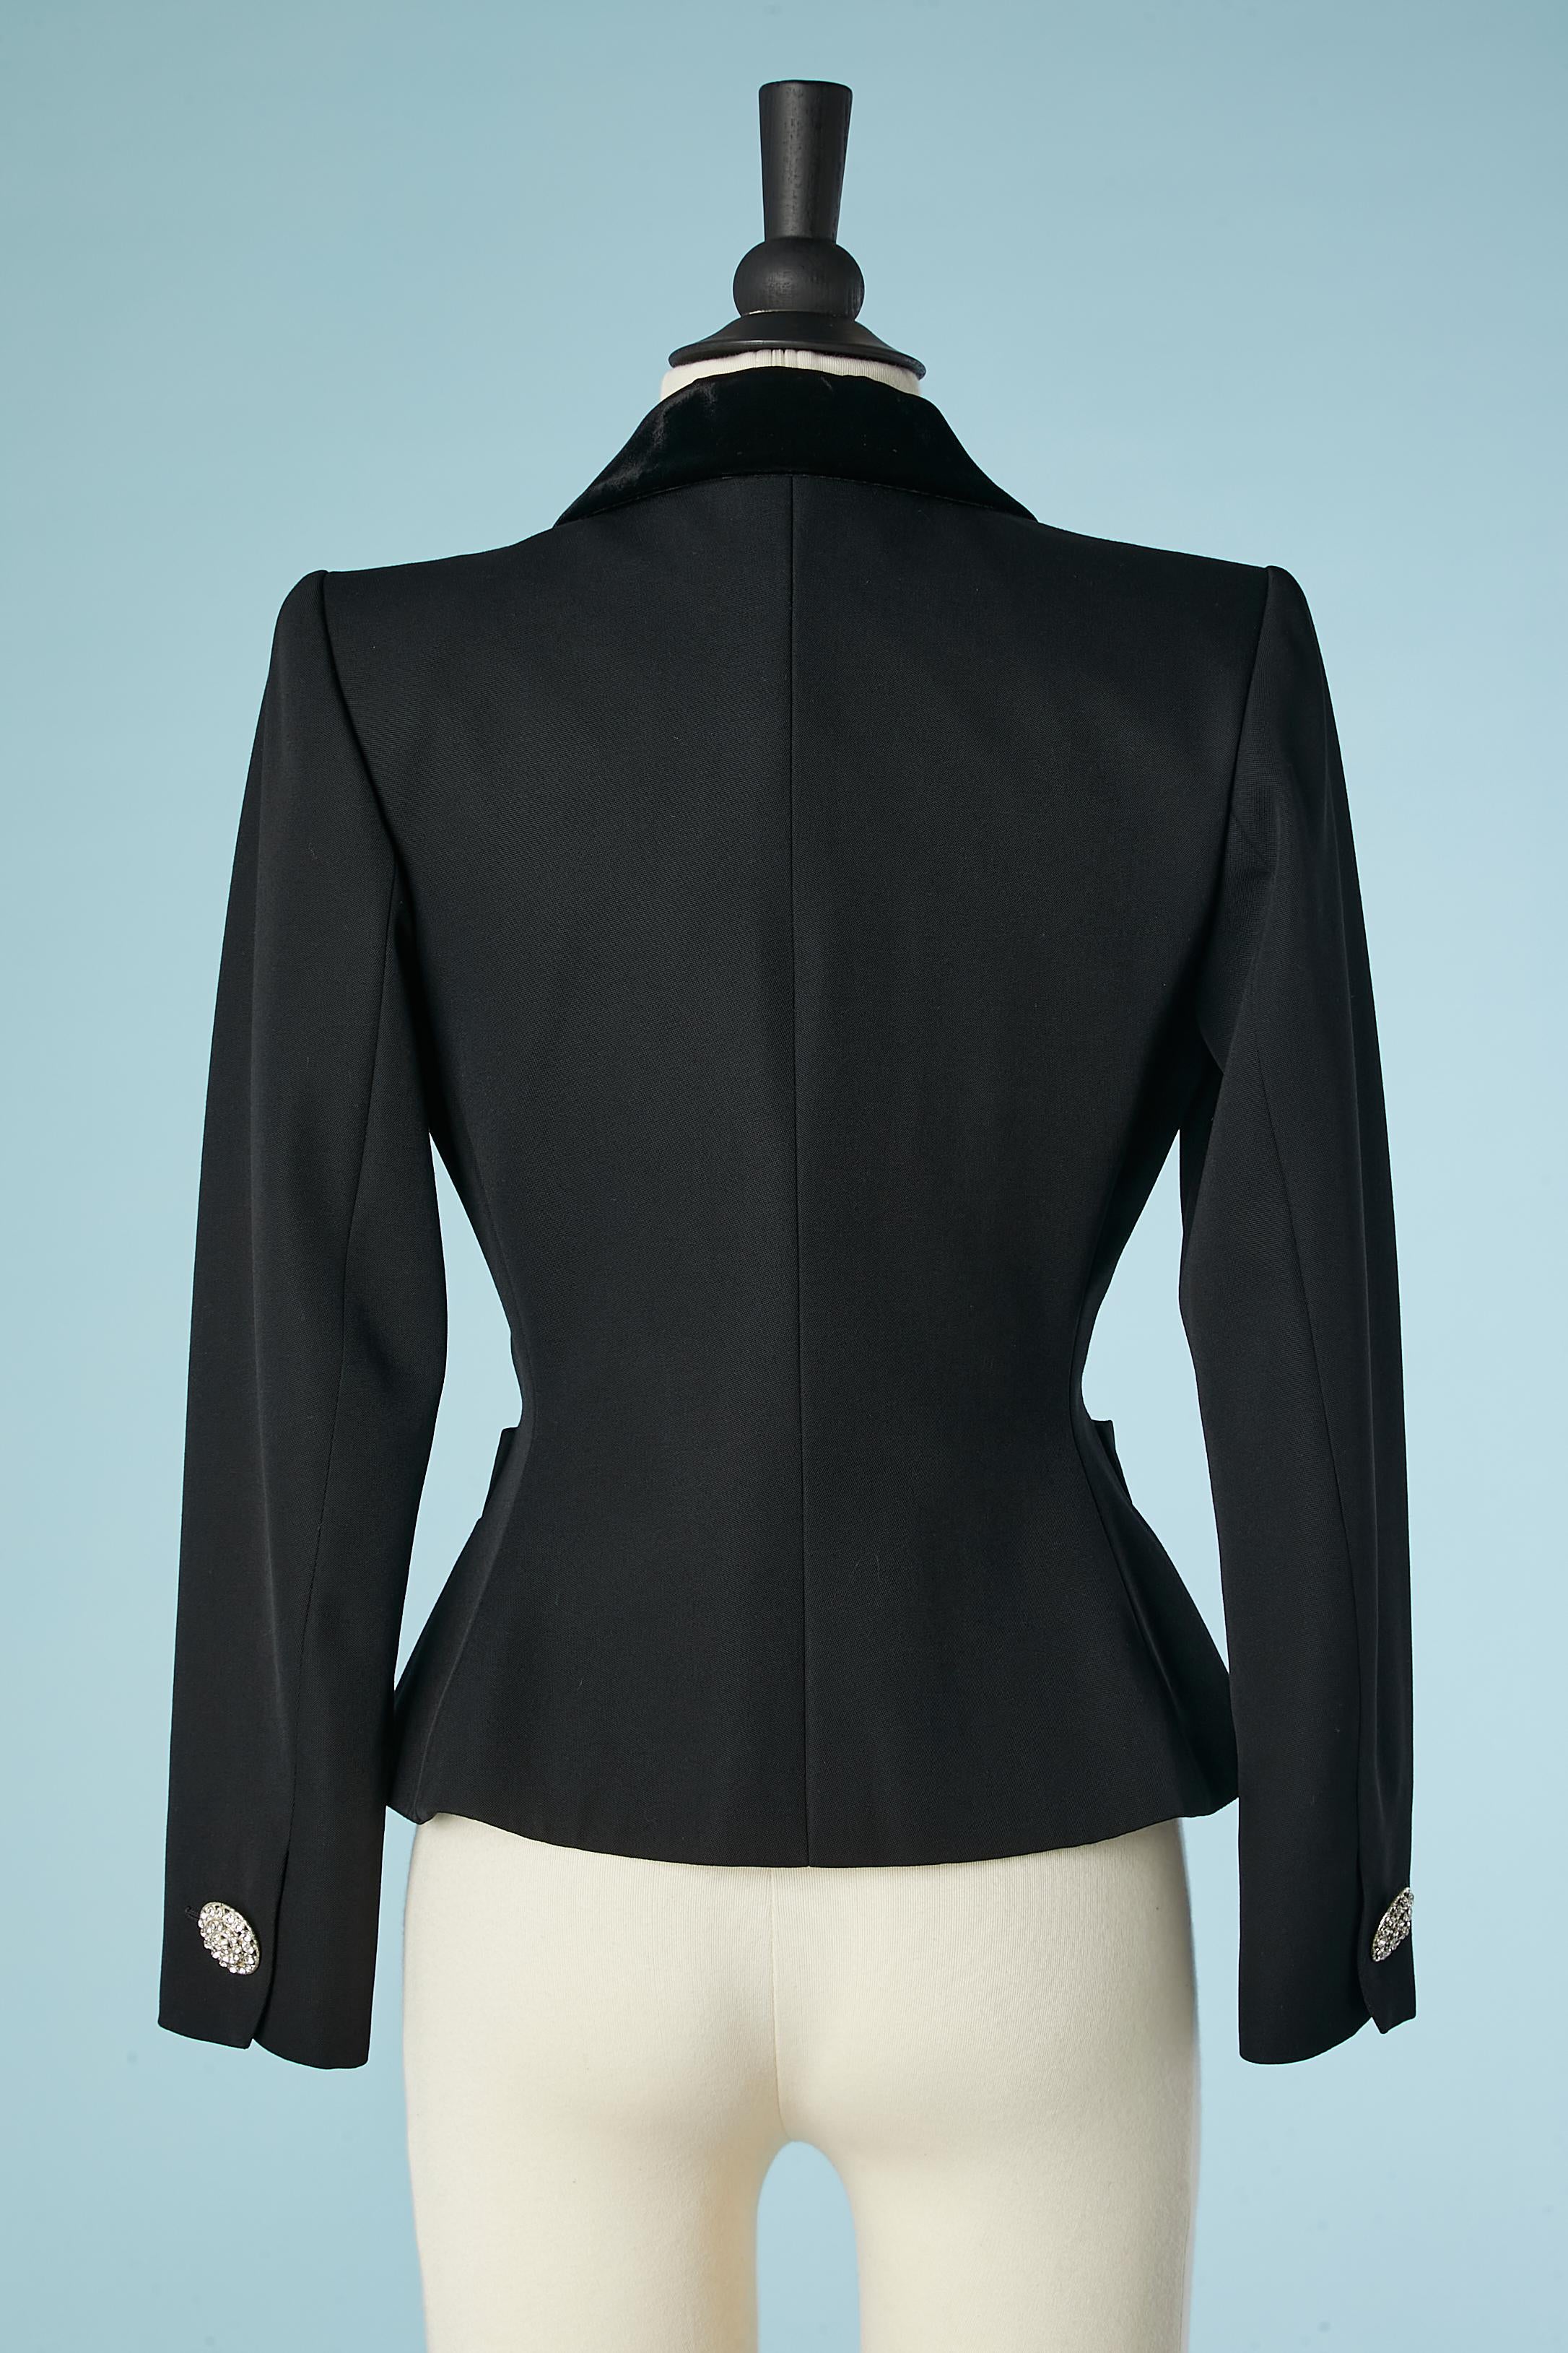 Black evening jacket with velvet collar and rhinestone buttons YSL Rive Gauche  For Sale 1